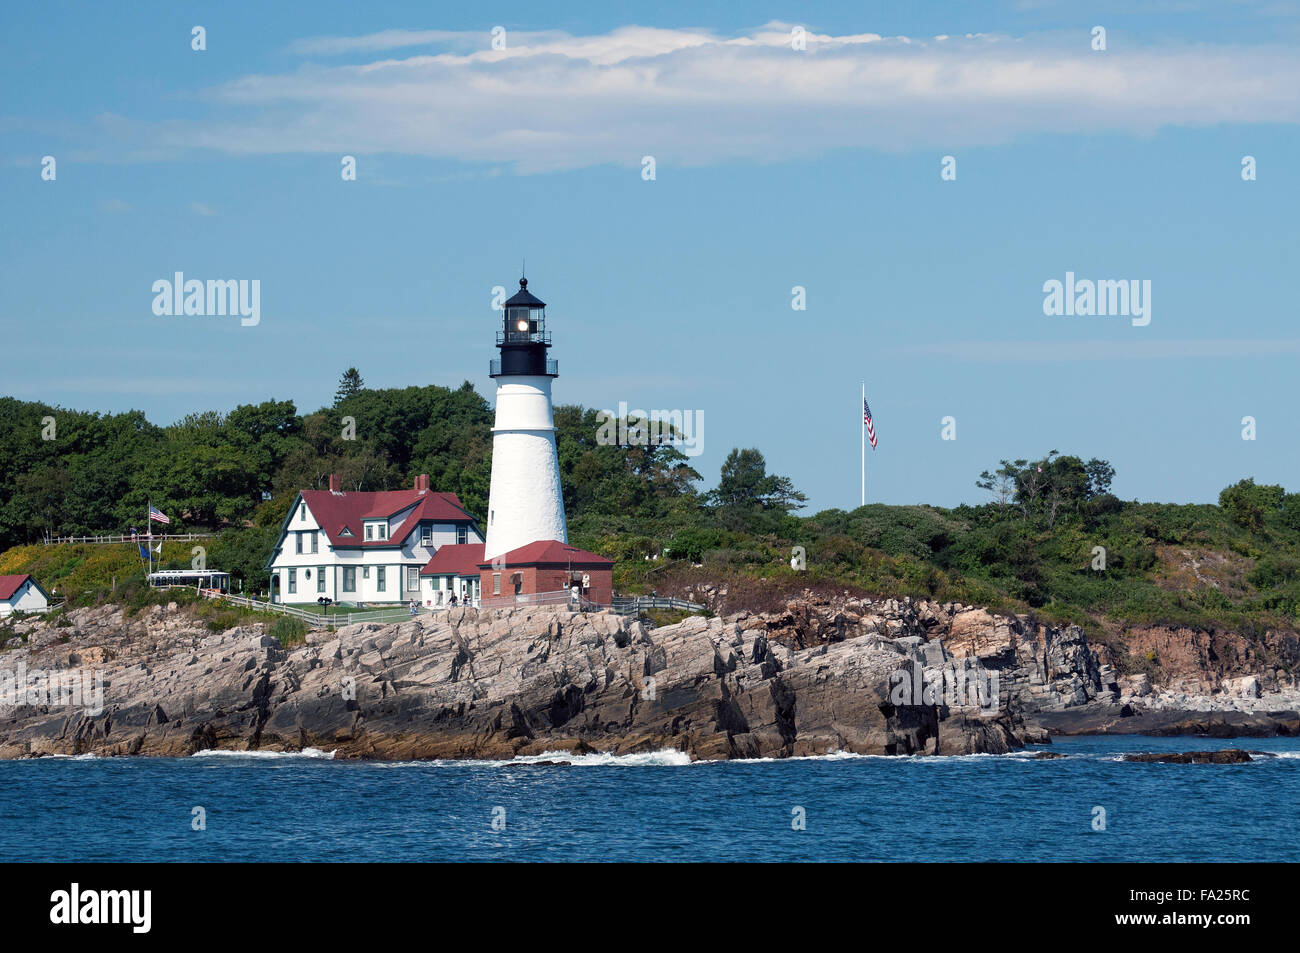 View from water of Portland Head lighthouse which shines brightly to guide mariners around Portland Harbor in Maine on a summer day. Stock Photo